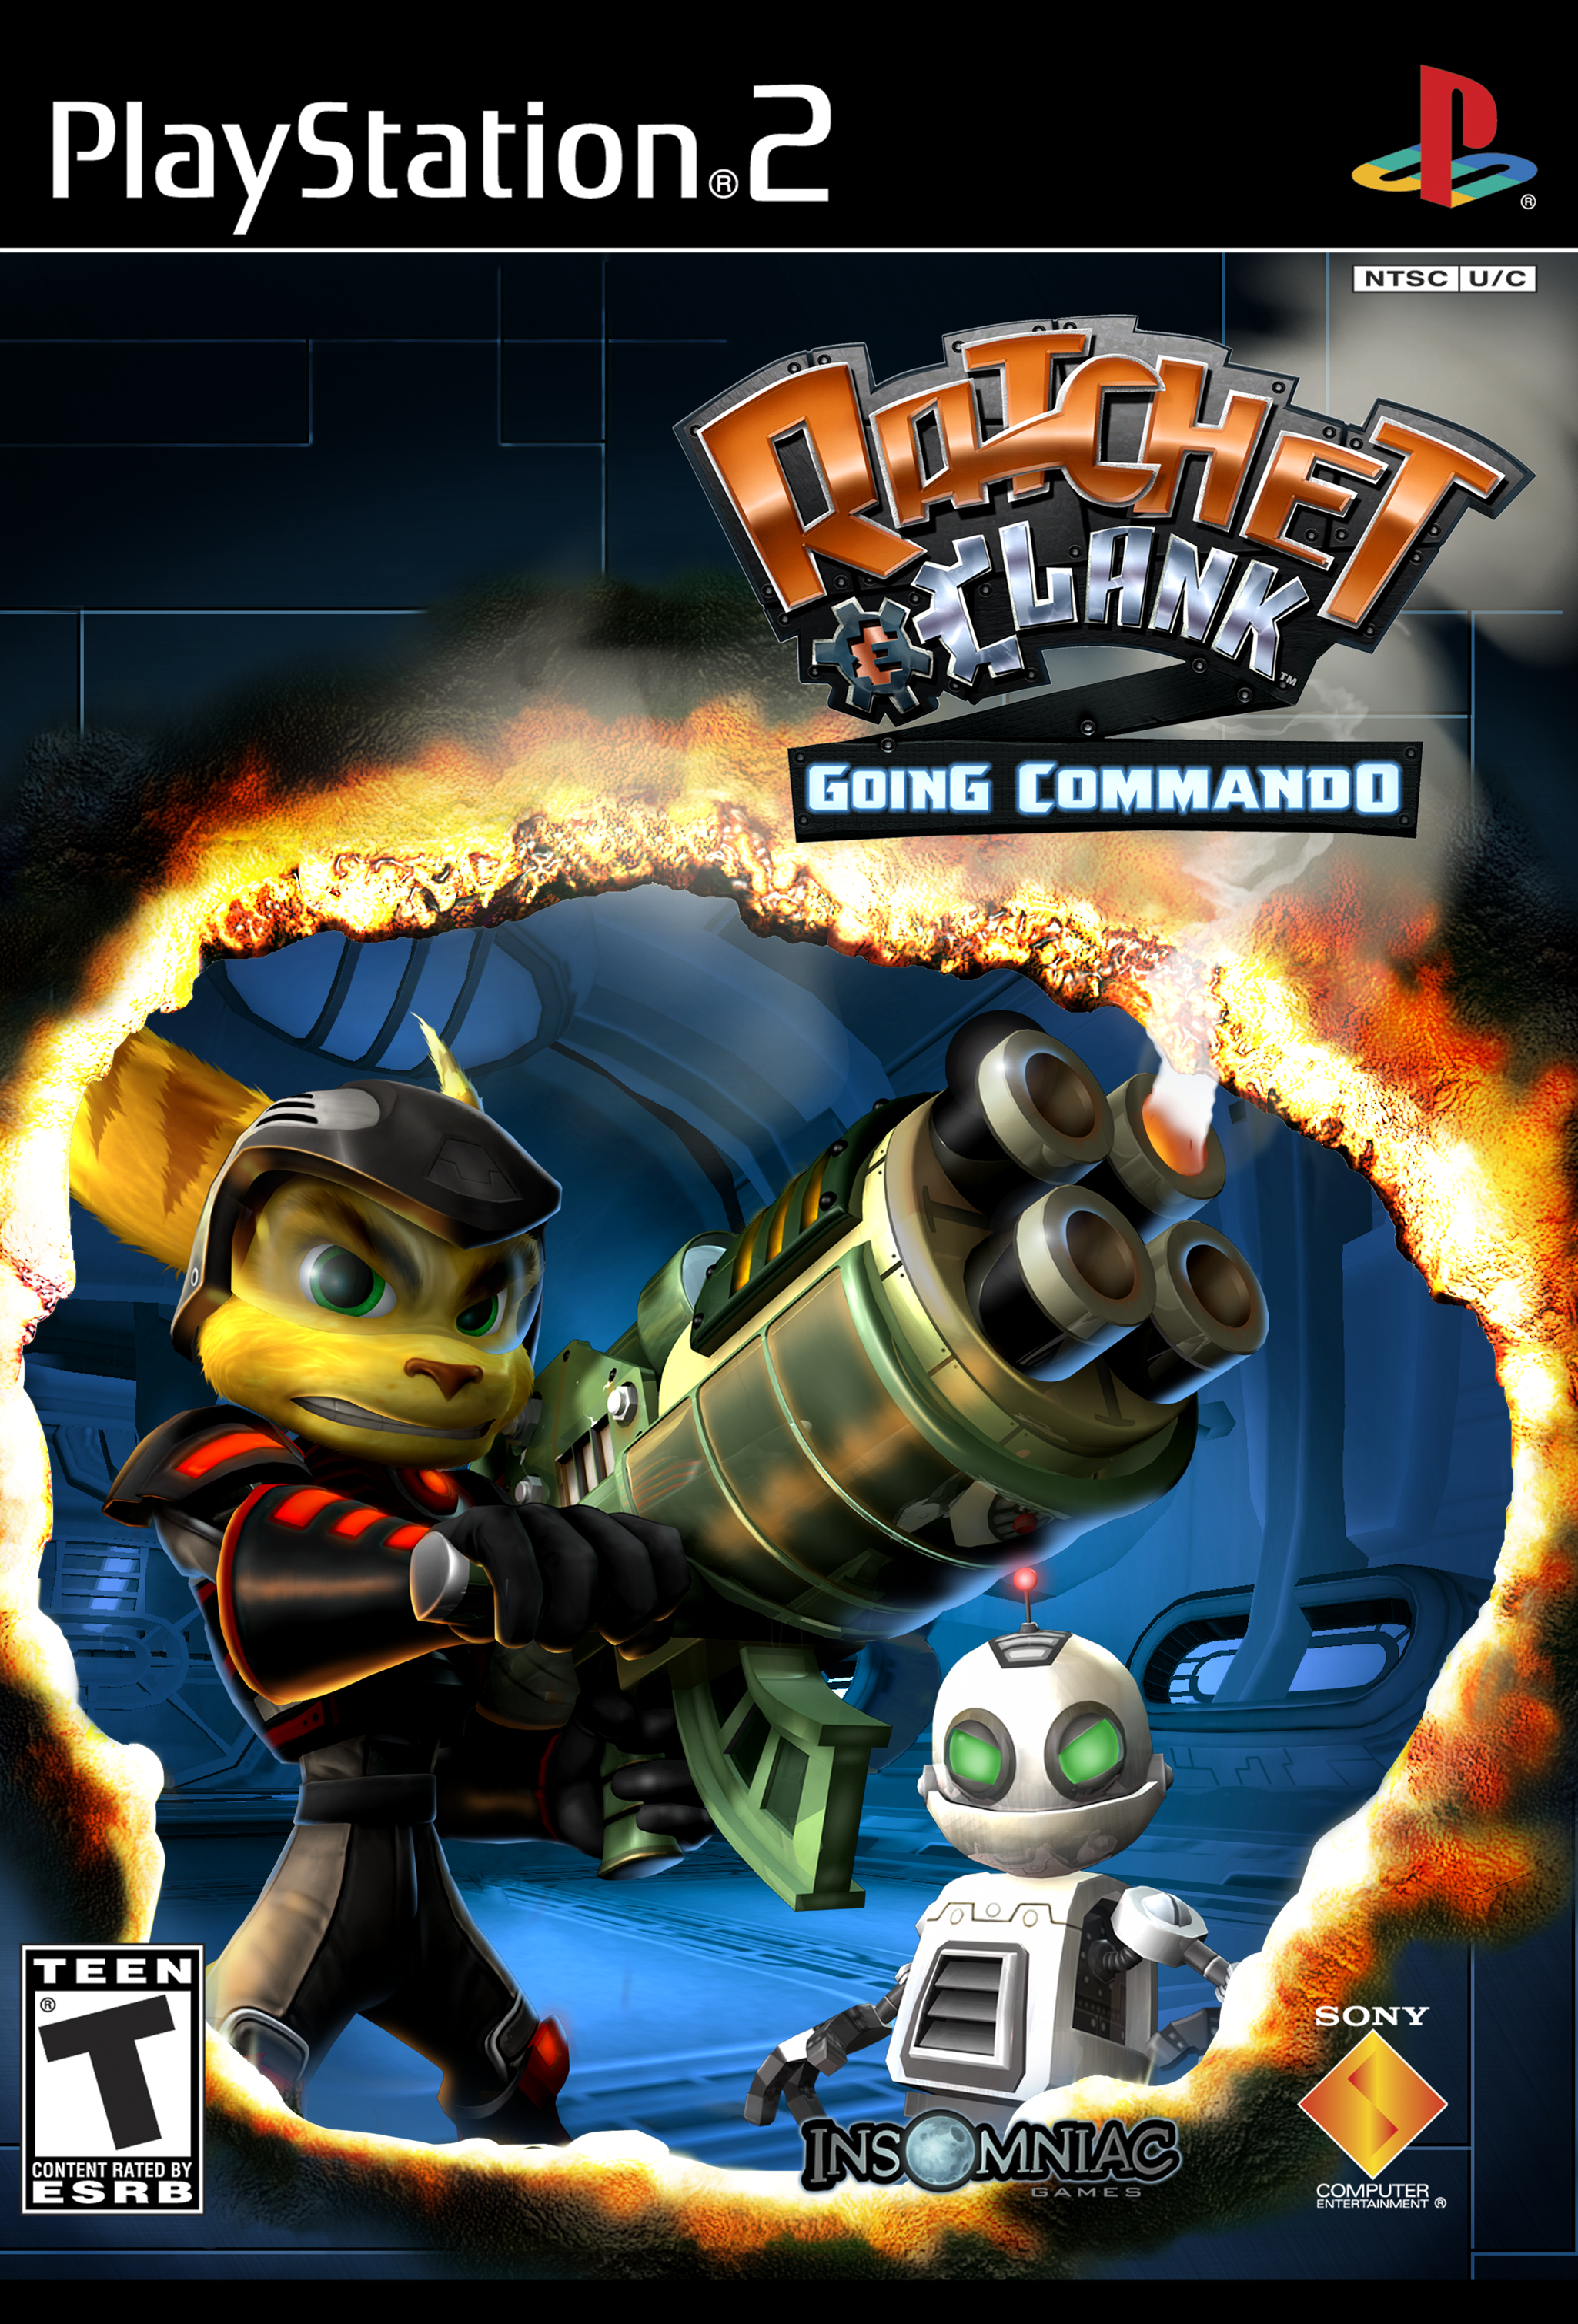 Modernizing PS5 hit Ratchet & Clank meant making it easier